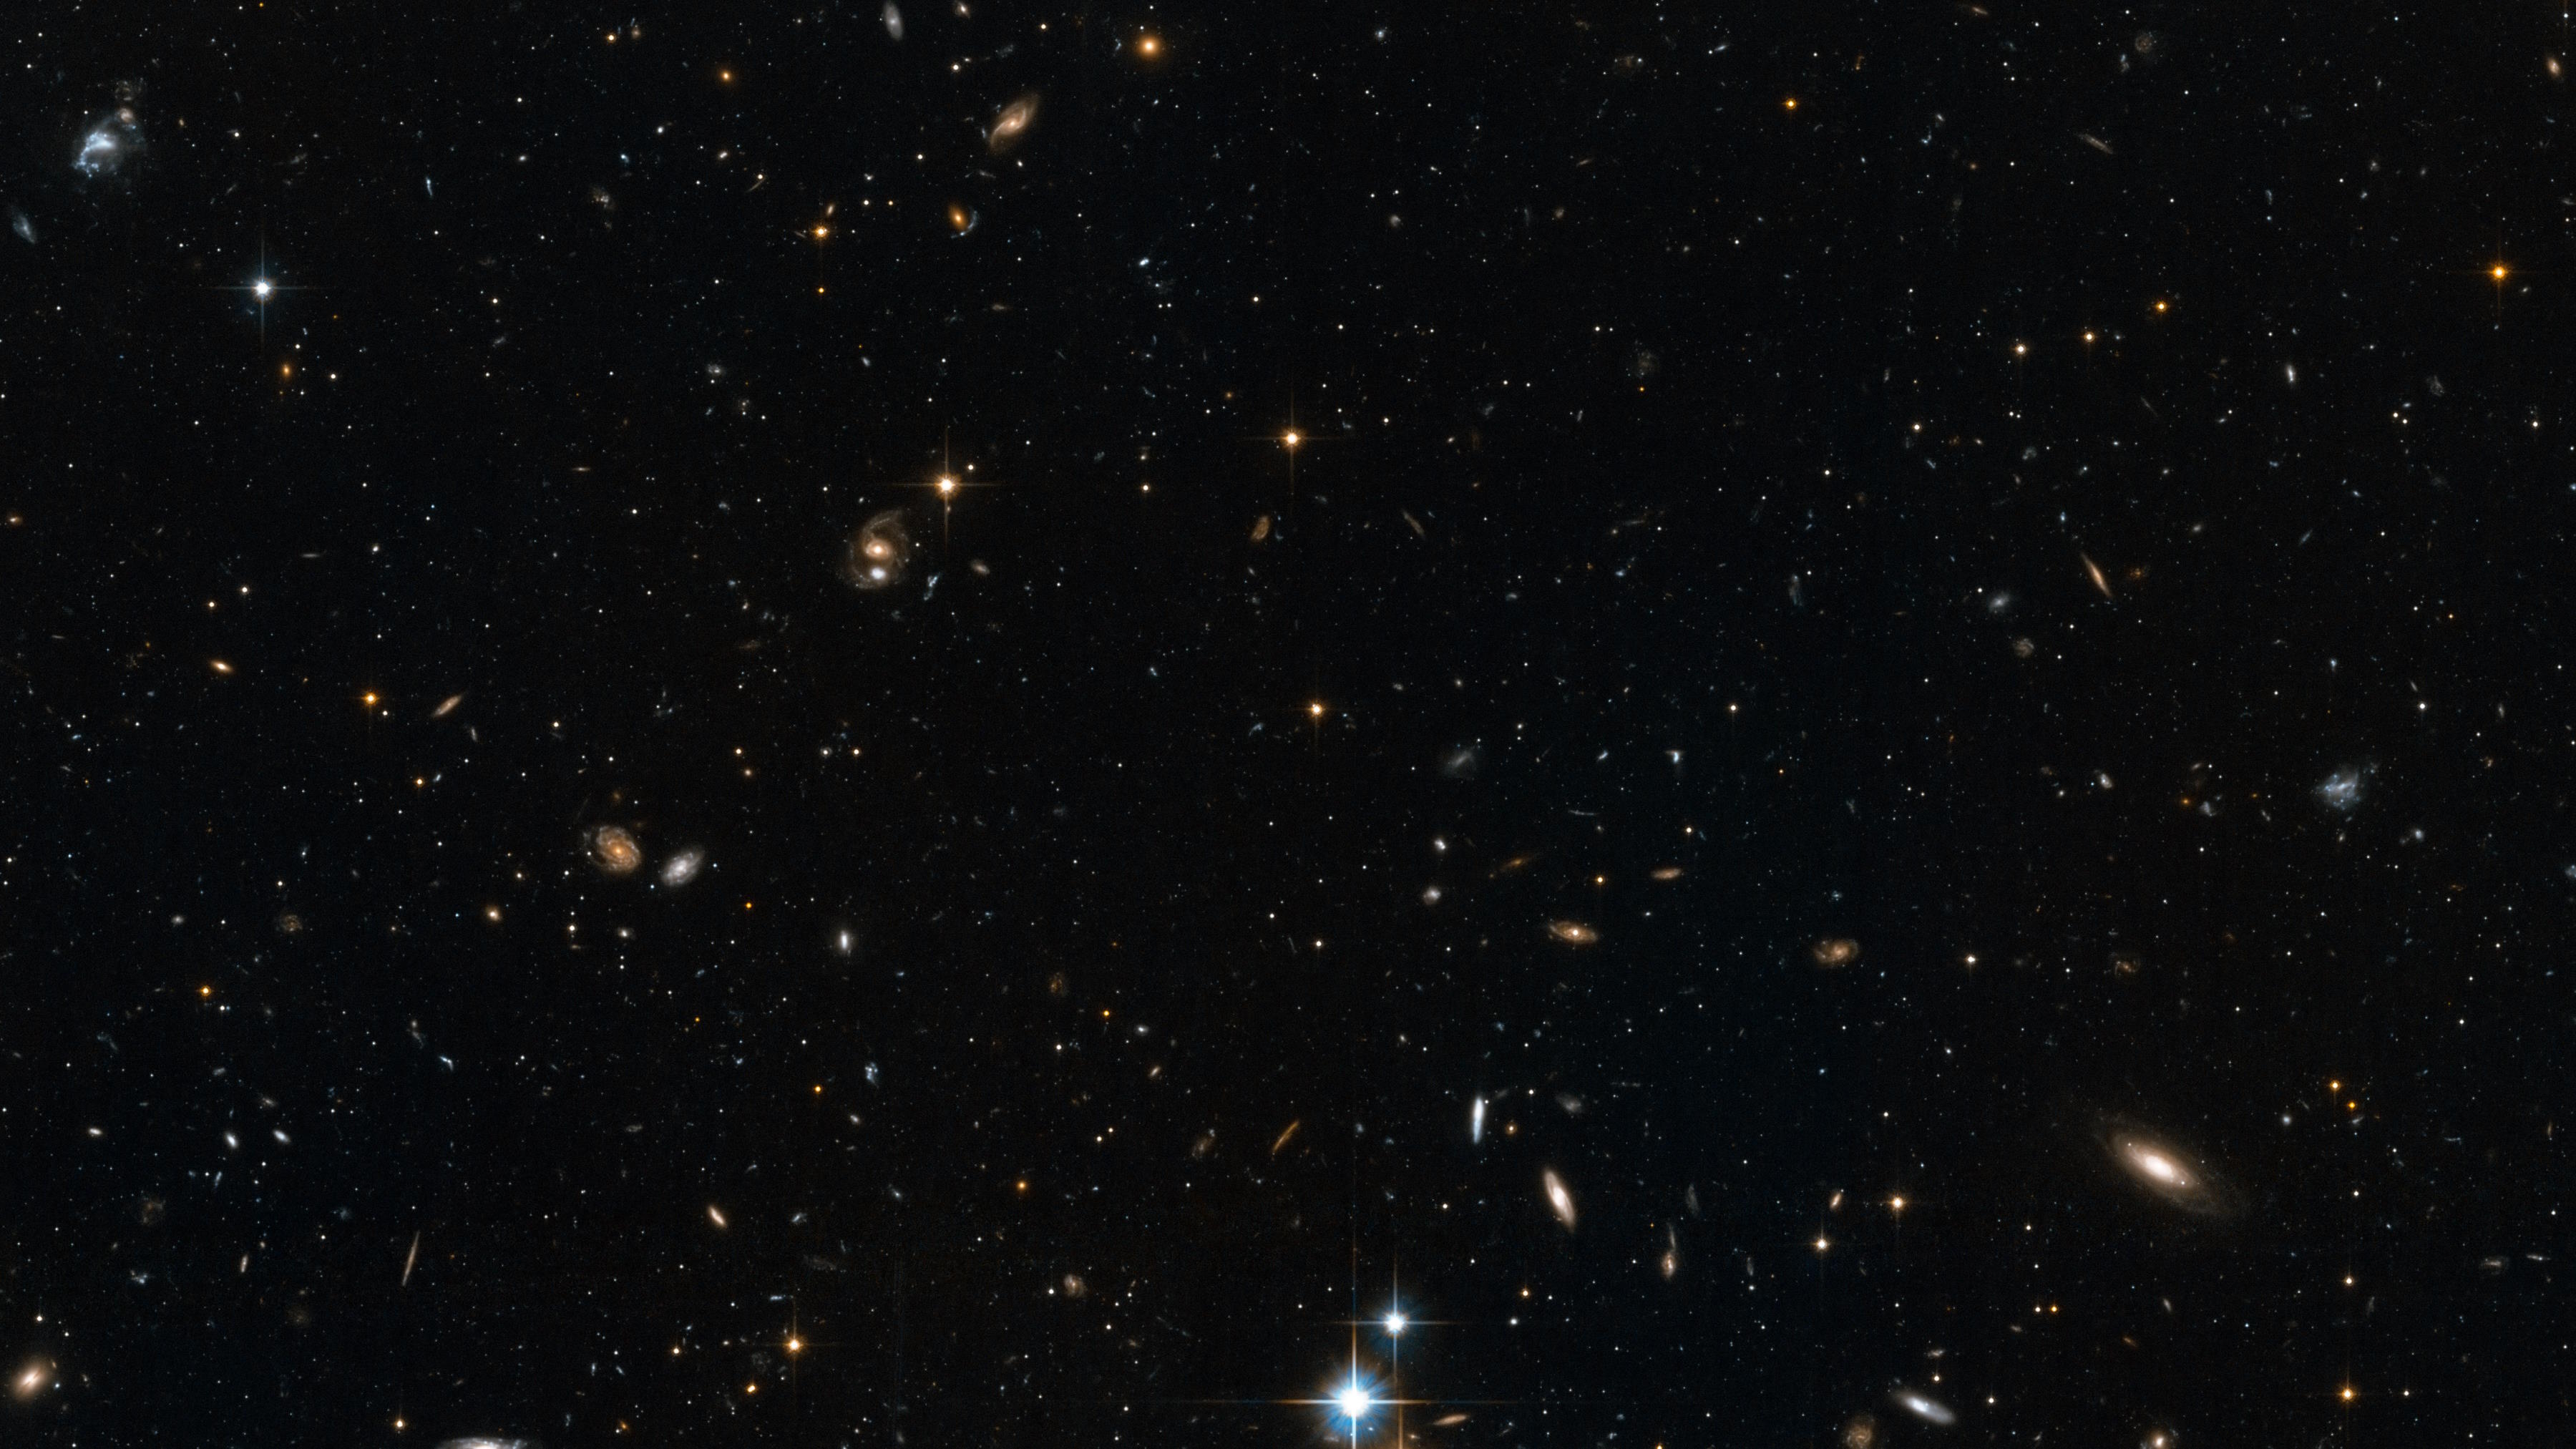 A deep space image showing numerous galaxies of different shapes and sizes scattered across a dark background, with many stars and cosmic objects, including the ancient Methuselah star, also visible throughout.